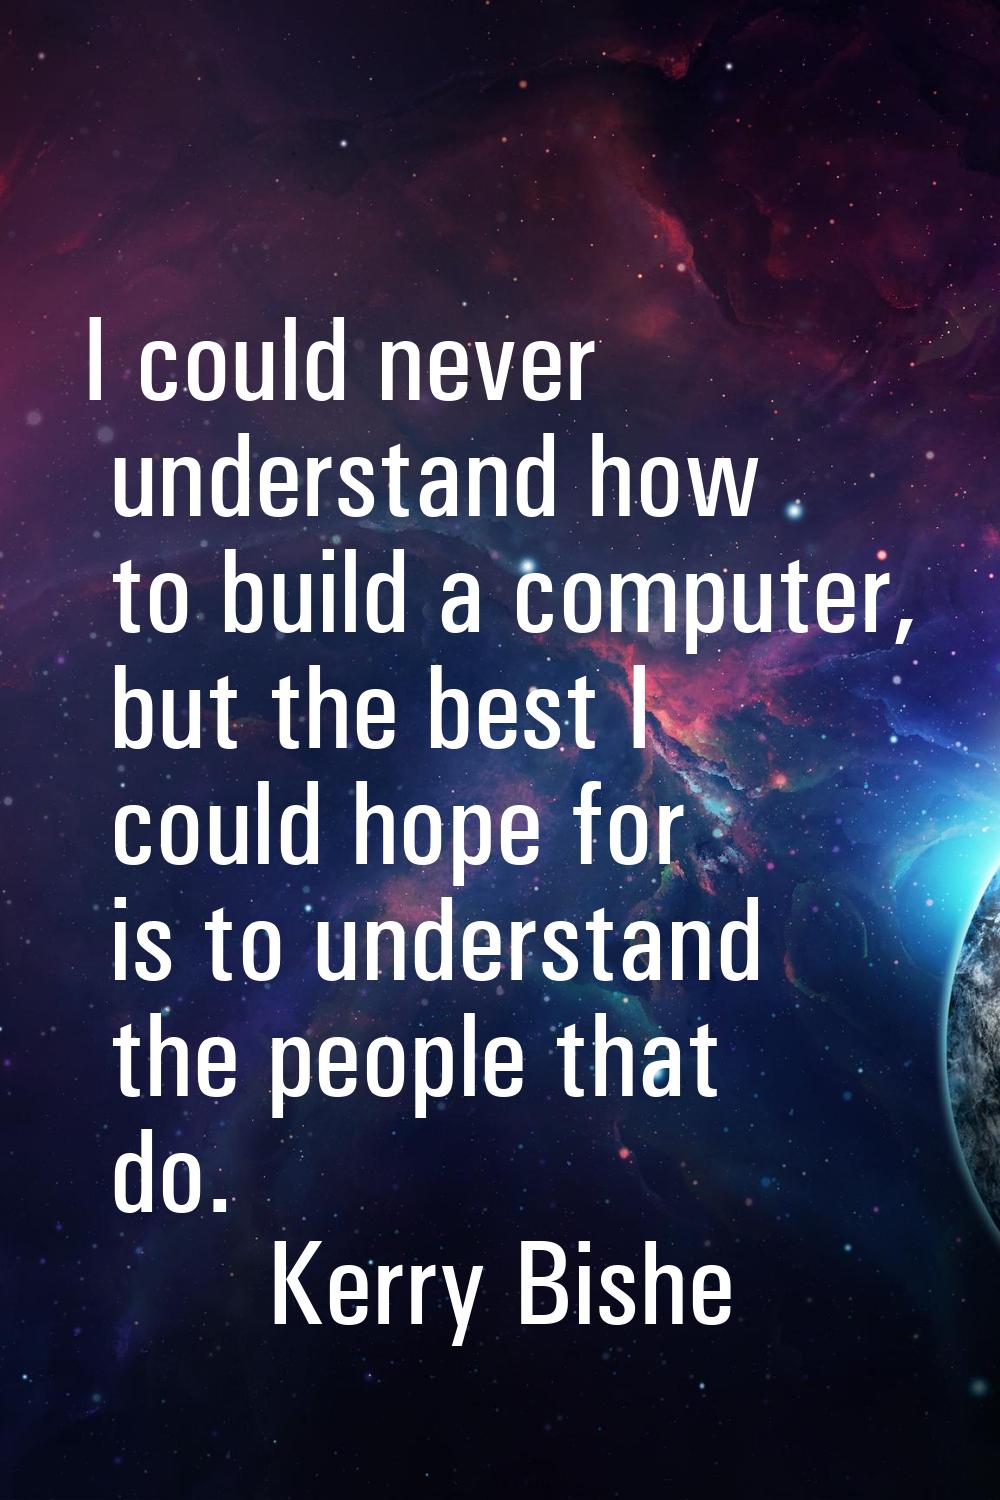 I could never understand how to build a computer, but the best I could hope for is to understand th